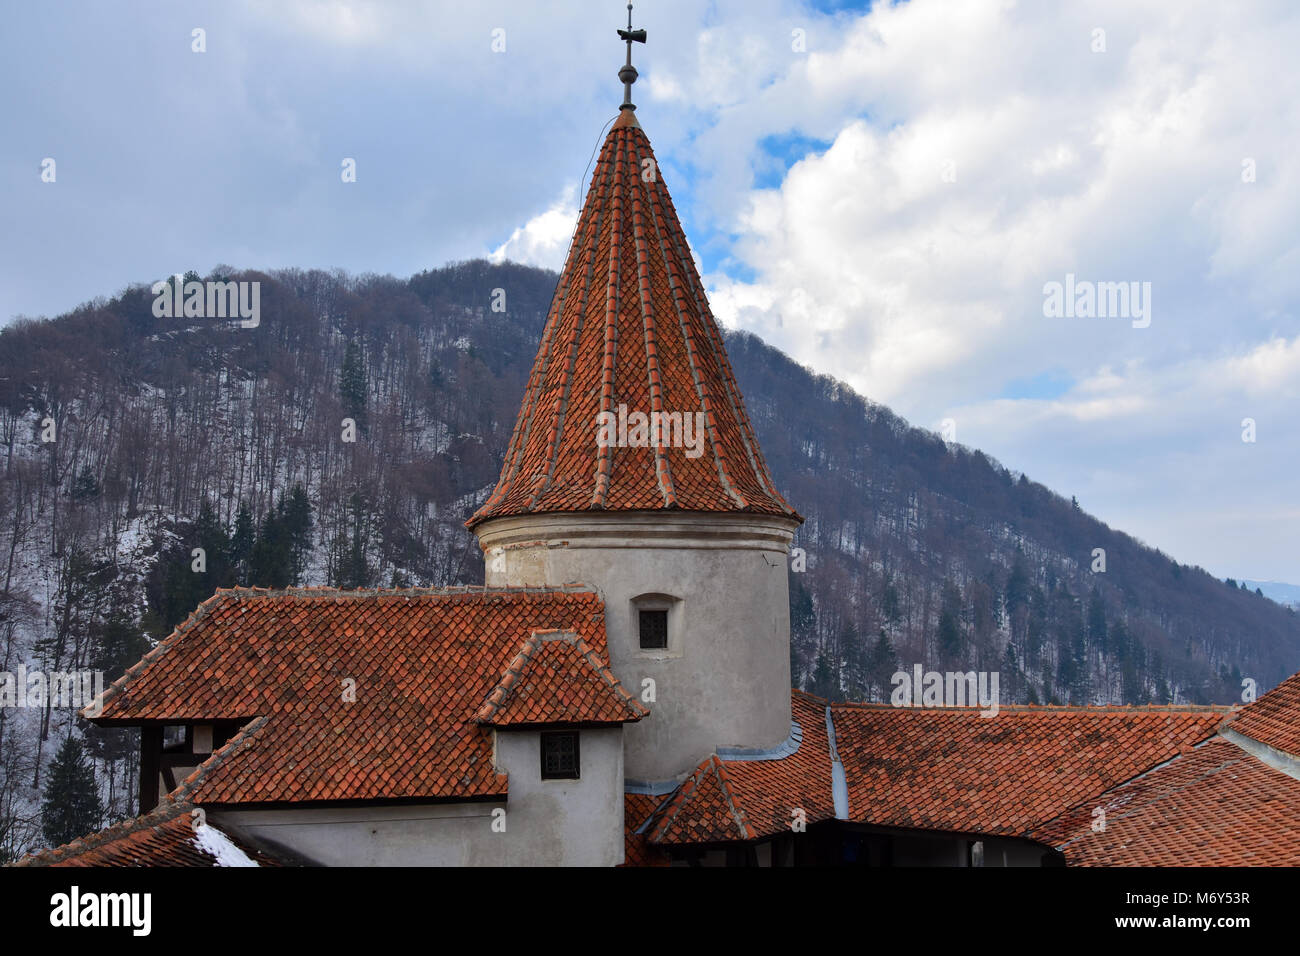 Tower of the Bran Castle (Castelul Bran), commonly known as 'Dracula's Castle'. Bran, Romania Stock Photo